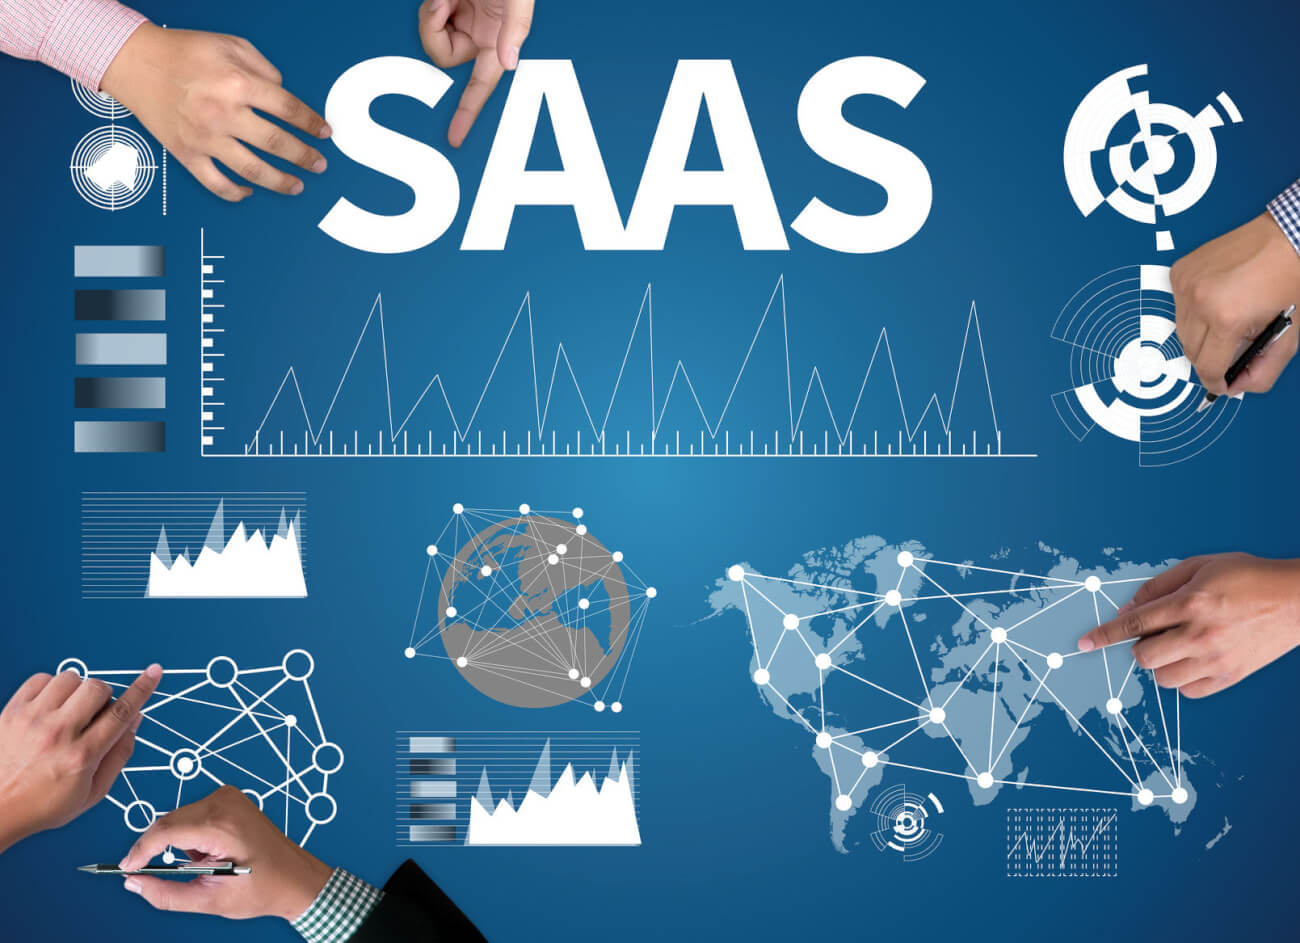 The Top 8 Tools for SaaS Companies & Entrepreneurs